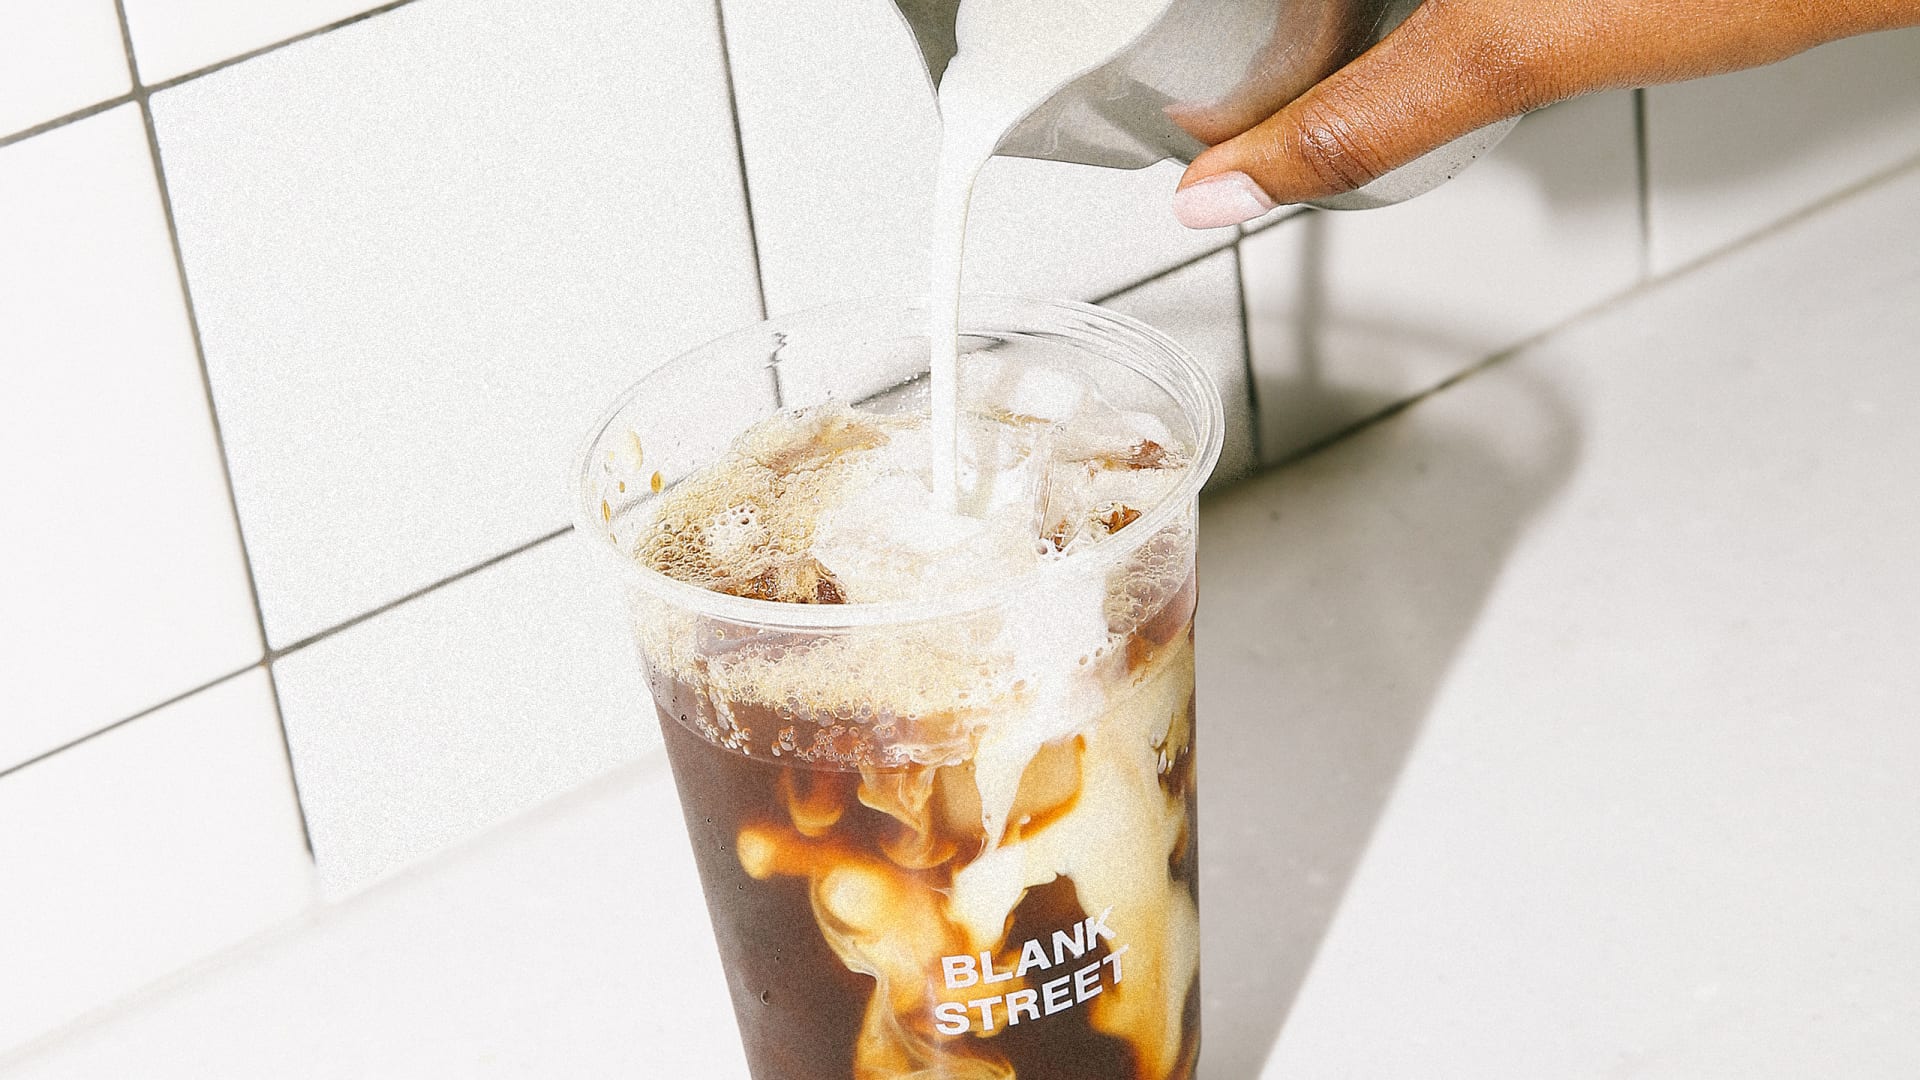 Blank Street Coffee raises $20 million from General Catalyst and Tiger Global